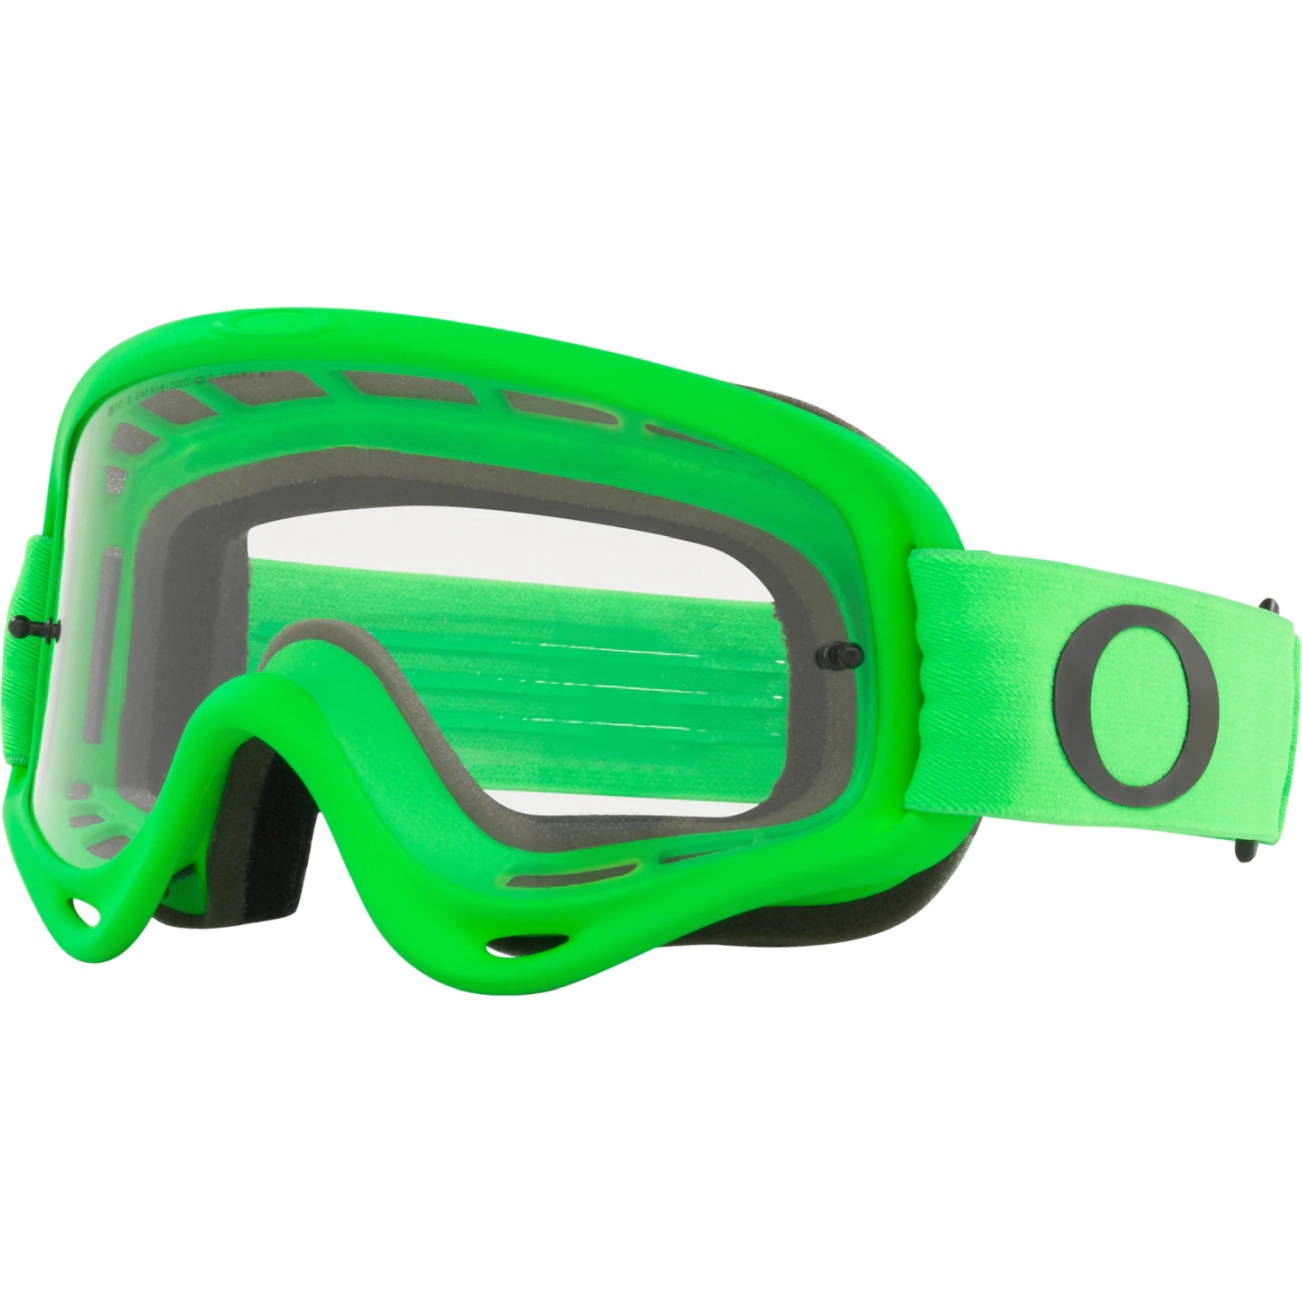 Picture of Oakley O-Frame MX Goggles - Moto Green/Clear - OO7029-64